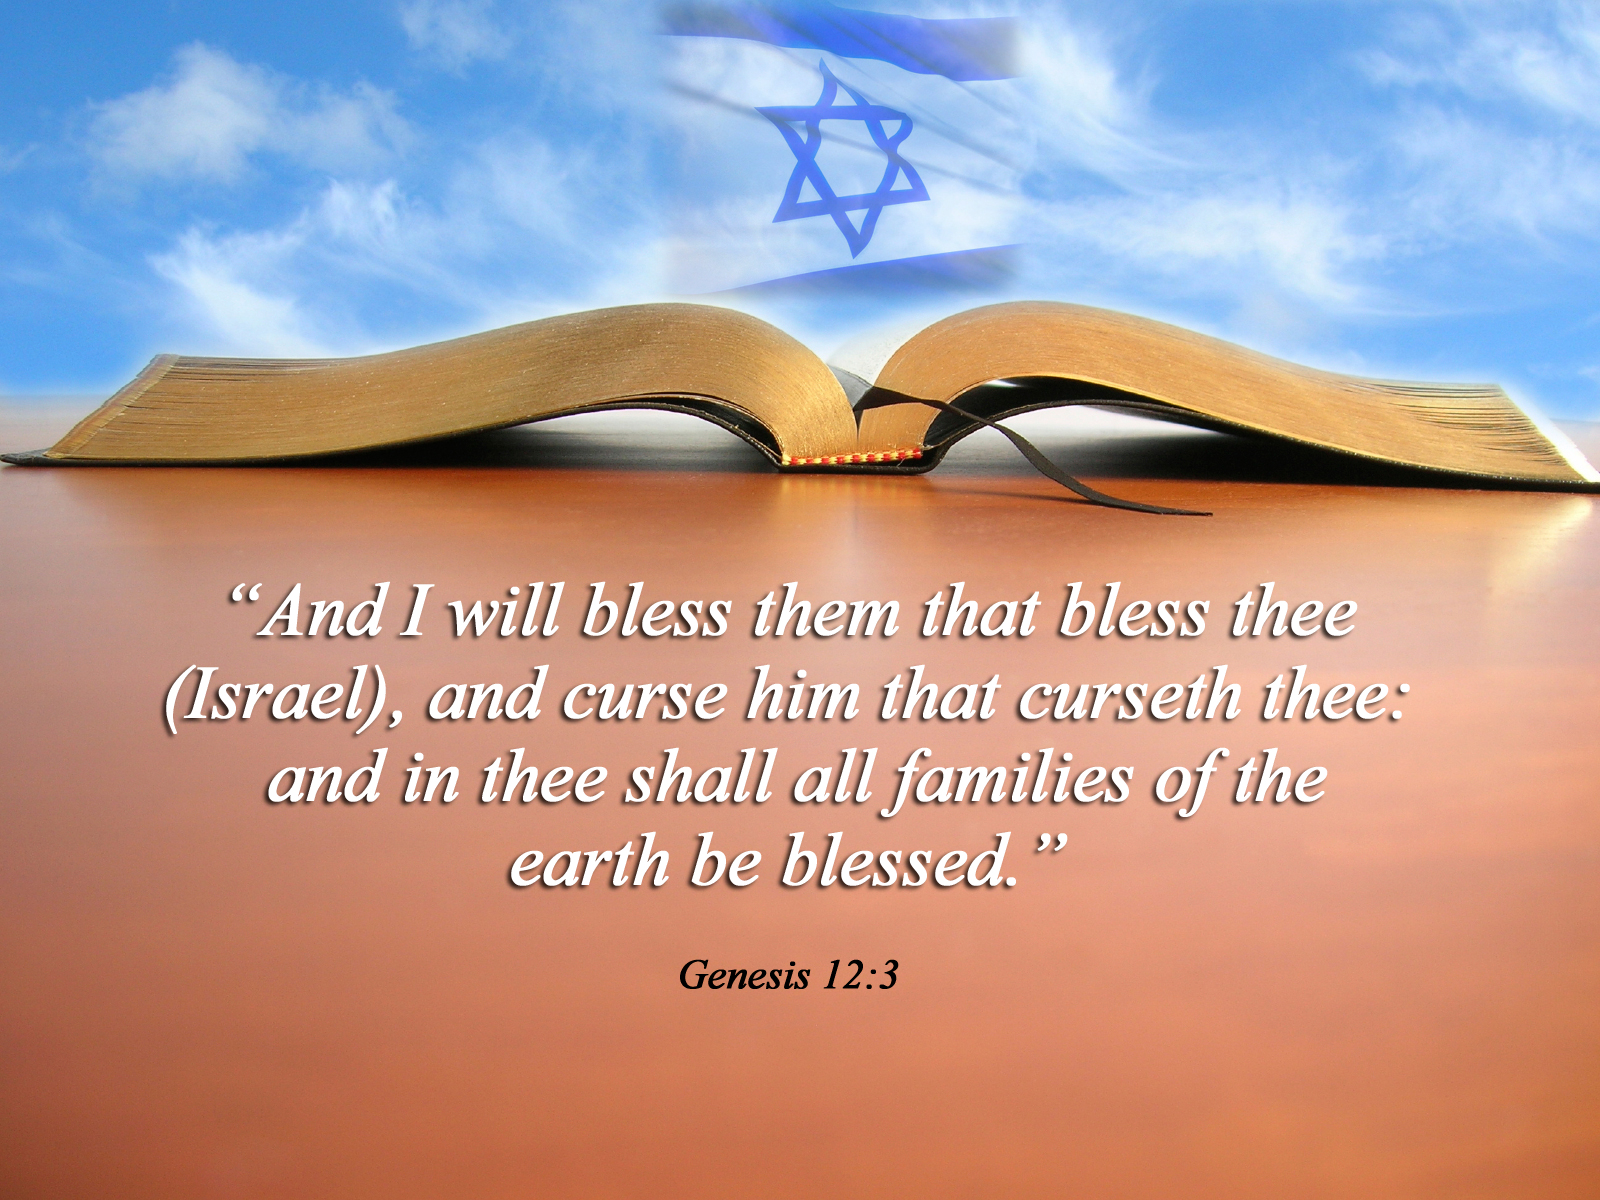 http://religiousbroadcasters.ca/rbcms/images/bless-israel.jpg